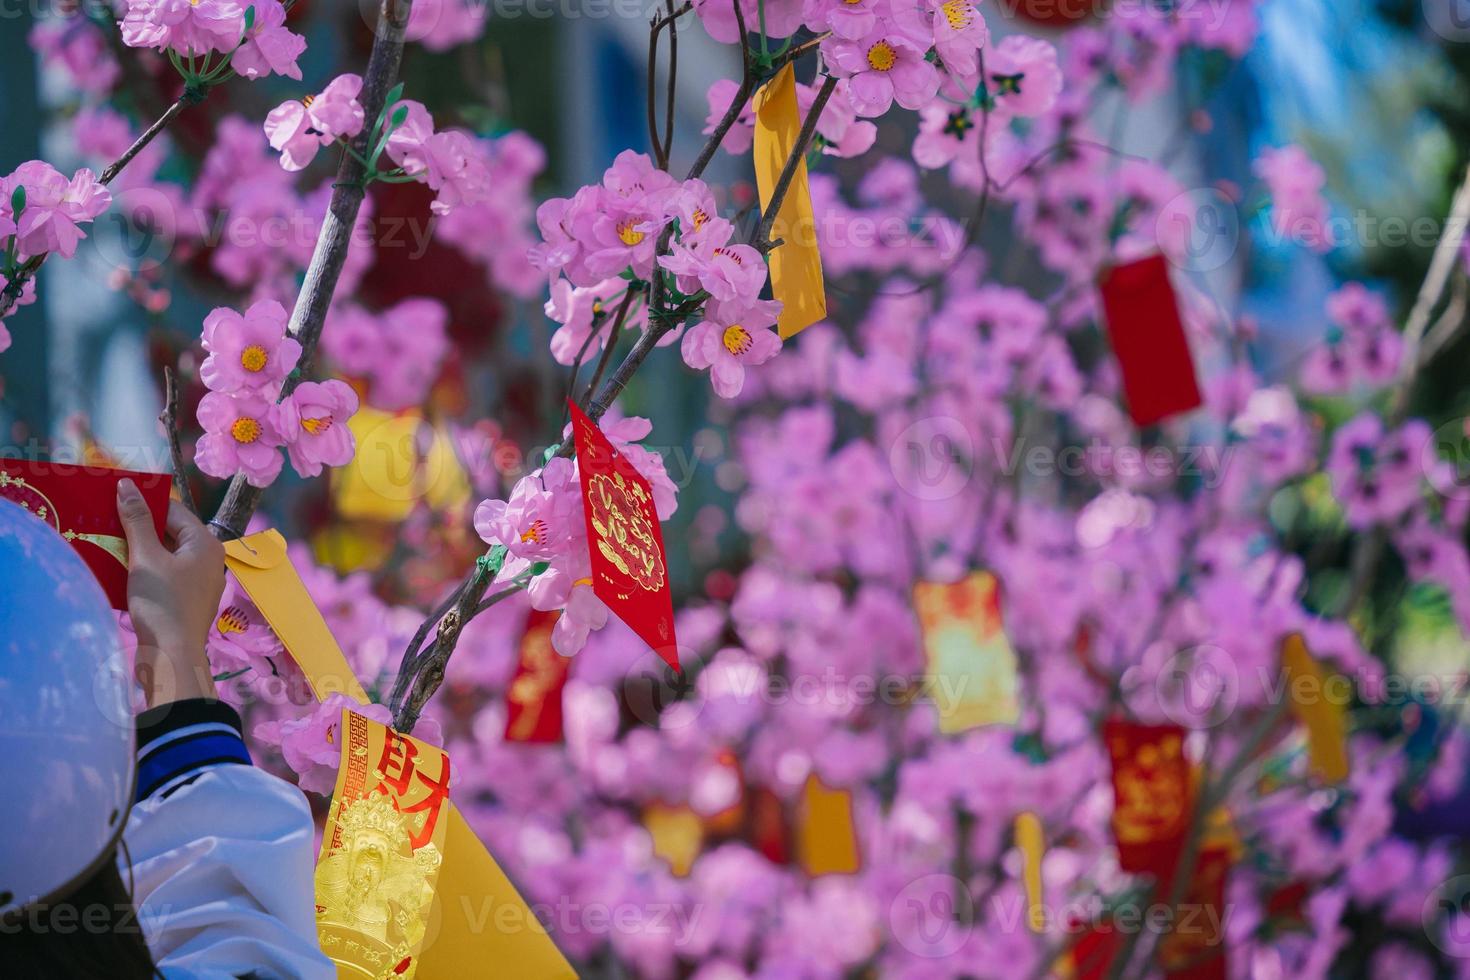 Colorful blossoms bloom in small village before Tet Festival, Vietnam Lunar Year. Peach flower, the symbol of Vietnamese lunar new year photo